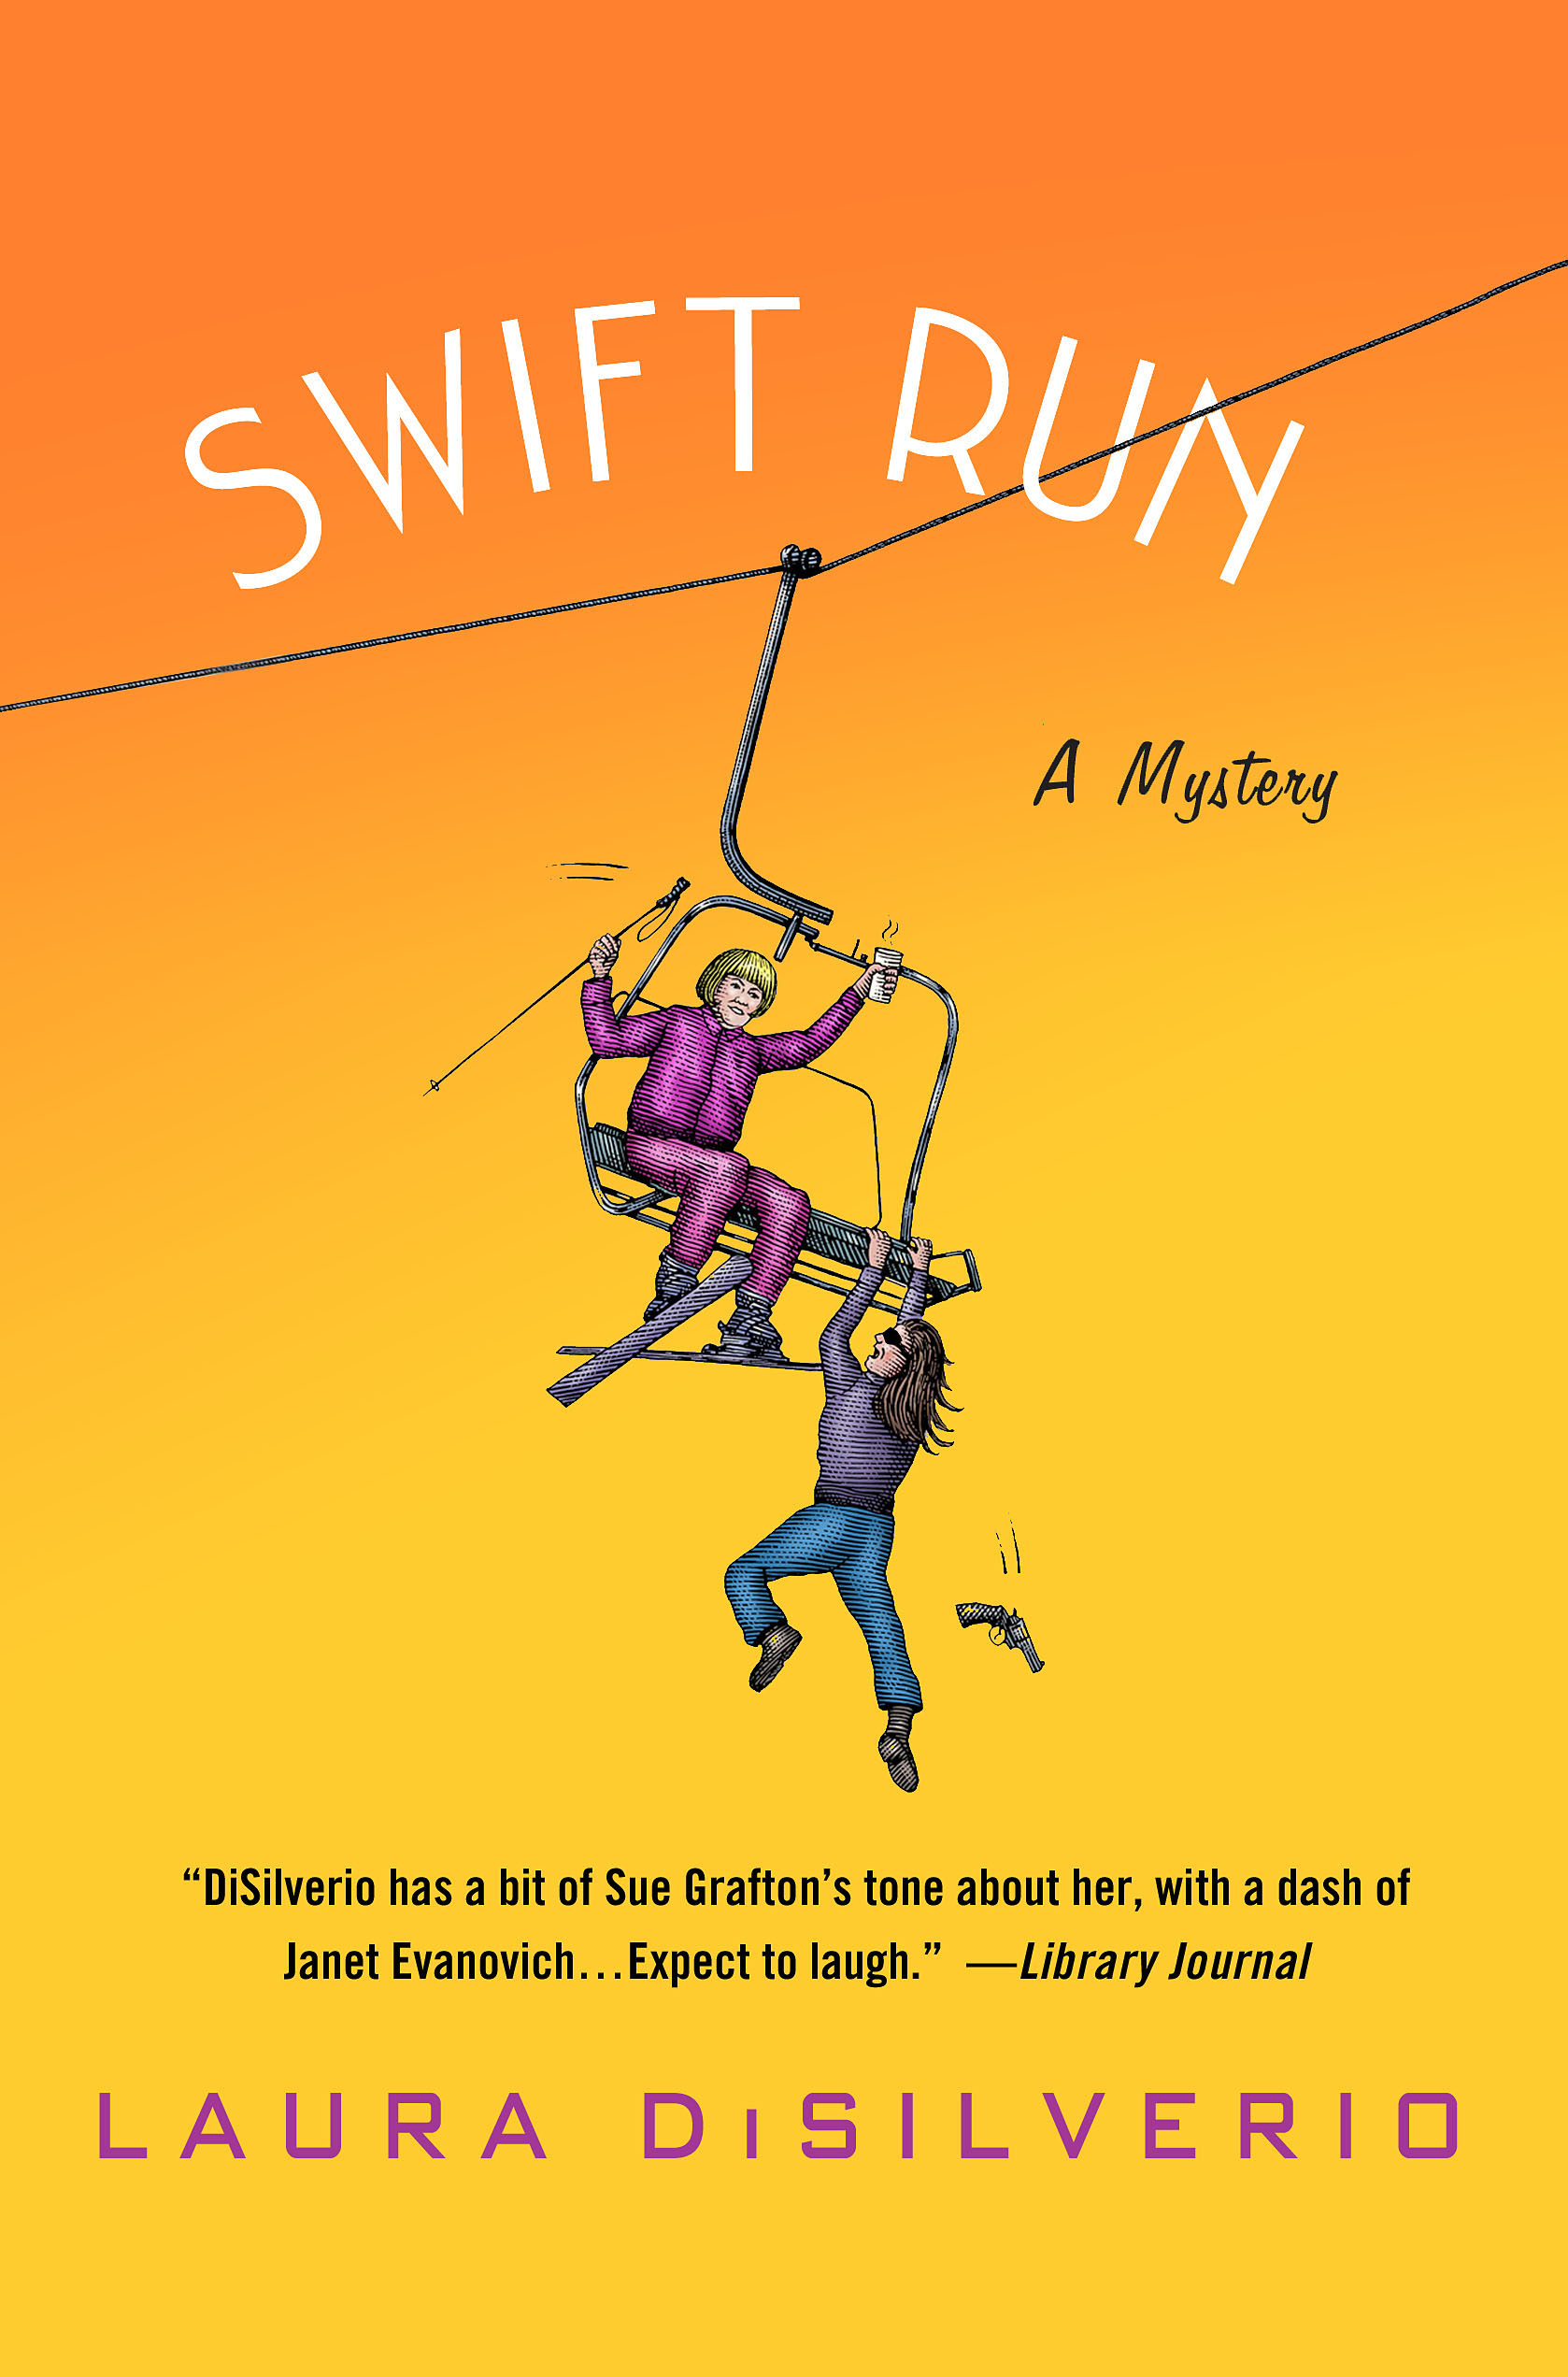 Be In My Next Book: Pre-Order SWIFT RUN for a Chance at Fame